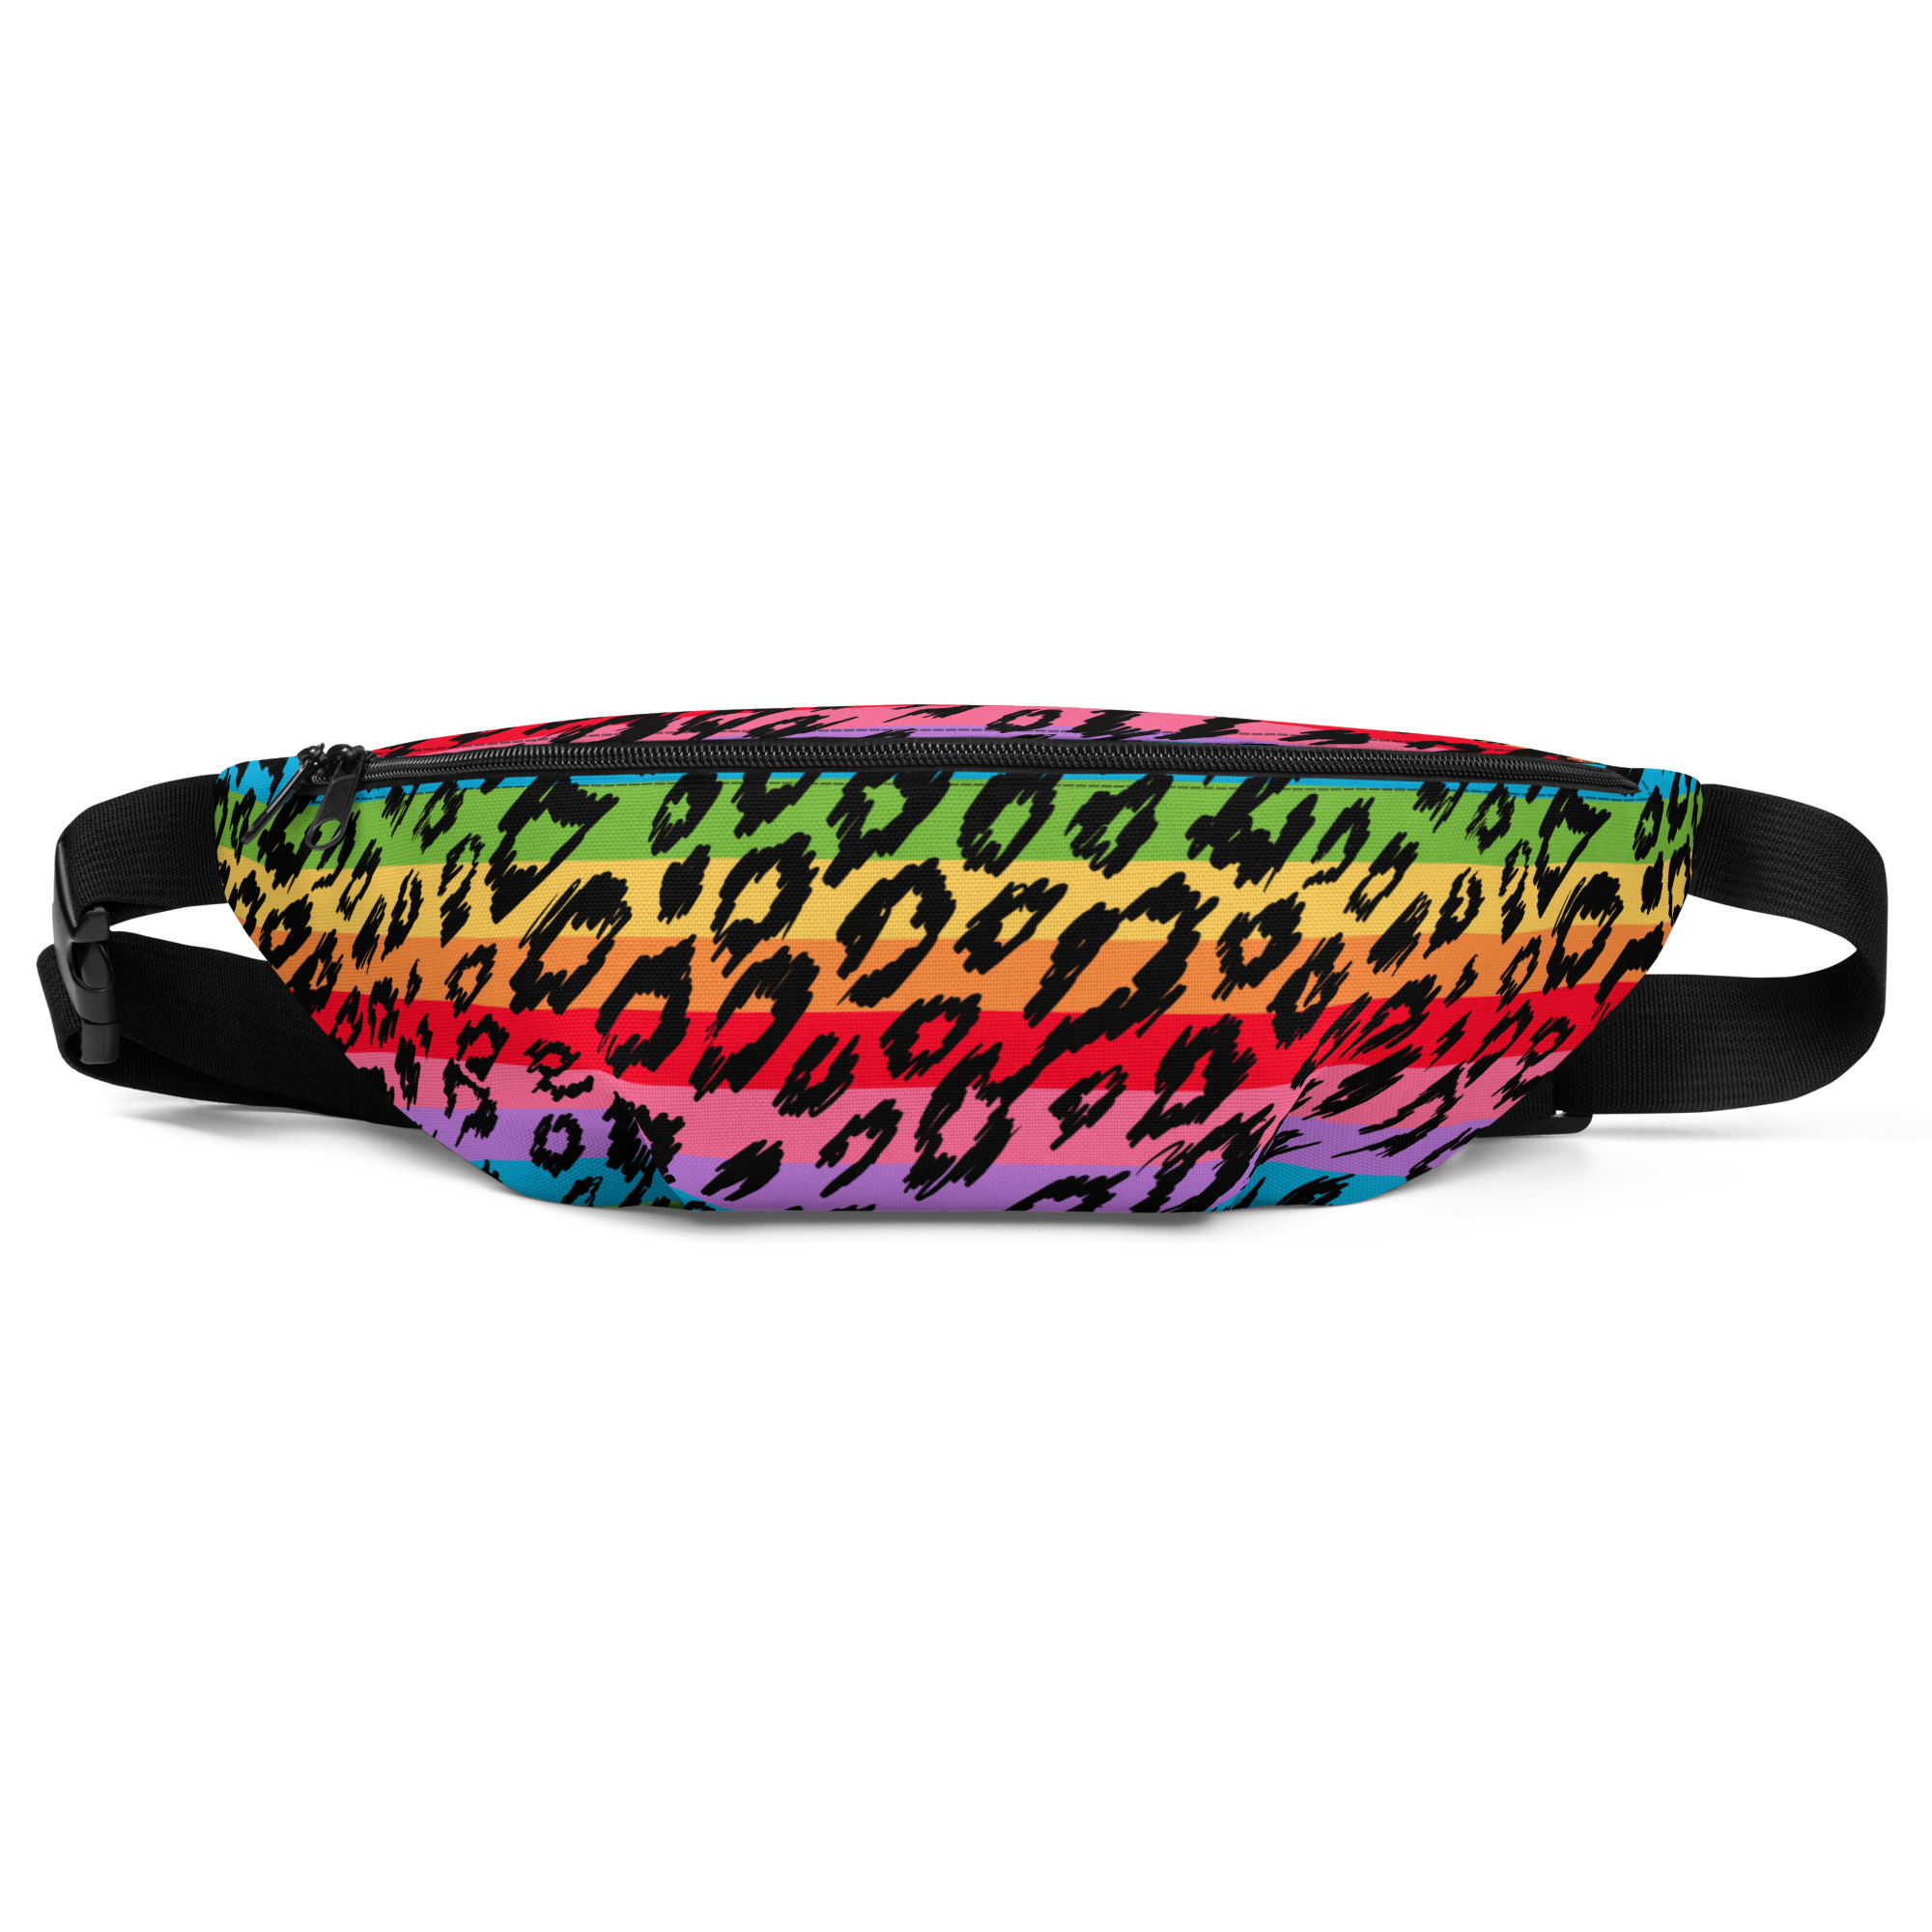 Featured image for “Rainbow Pride Leopard - Fanny Pack”